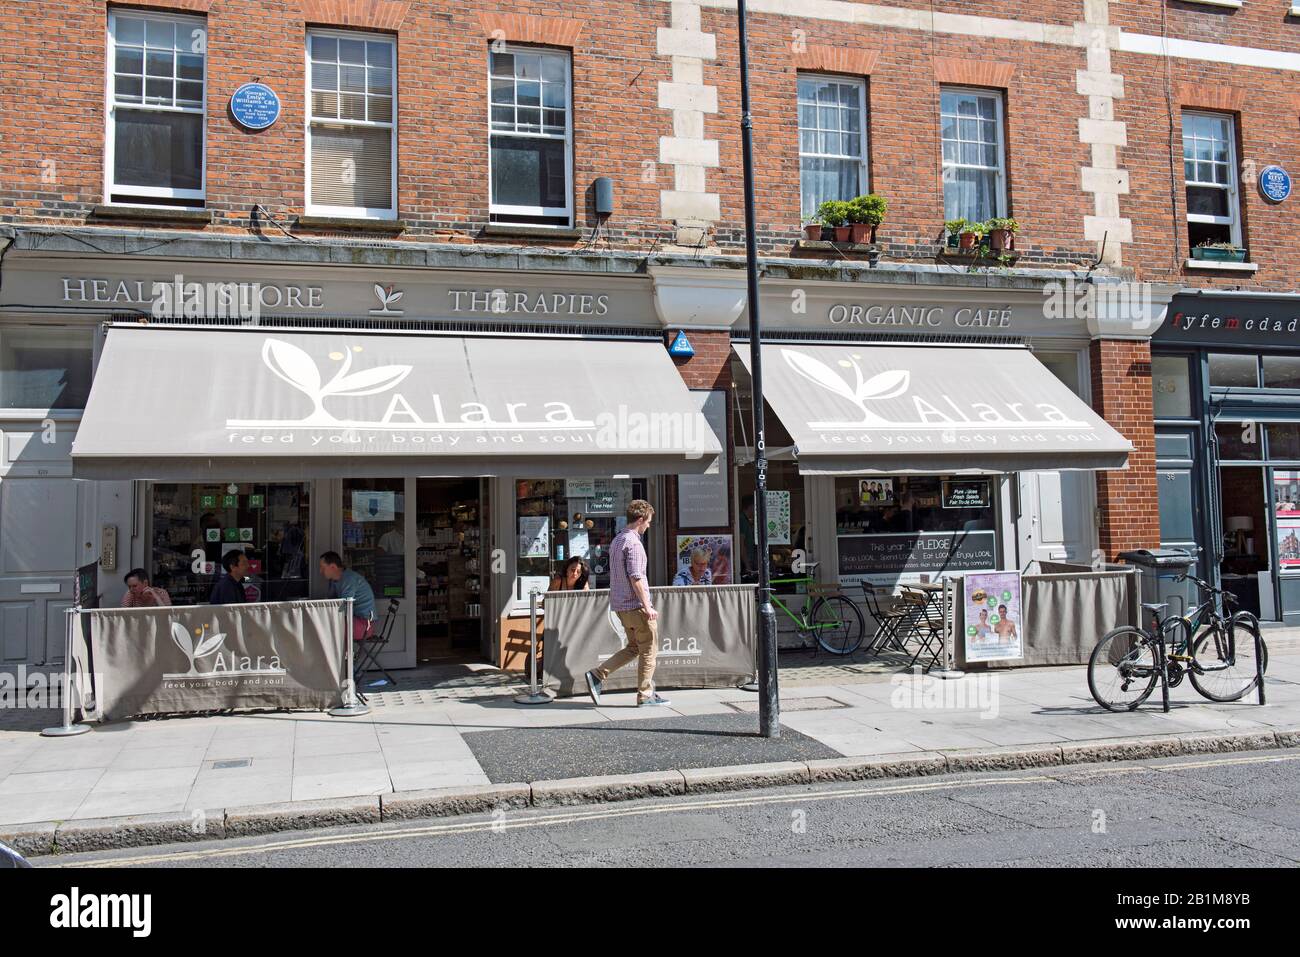 Alara Health Store and Organic Café with people eating outside, Marchmont Street, Bloomsbury, London Stock Photo